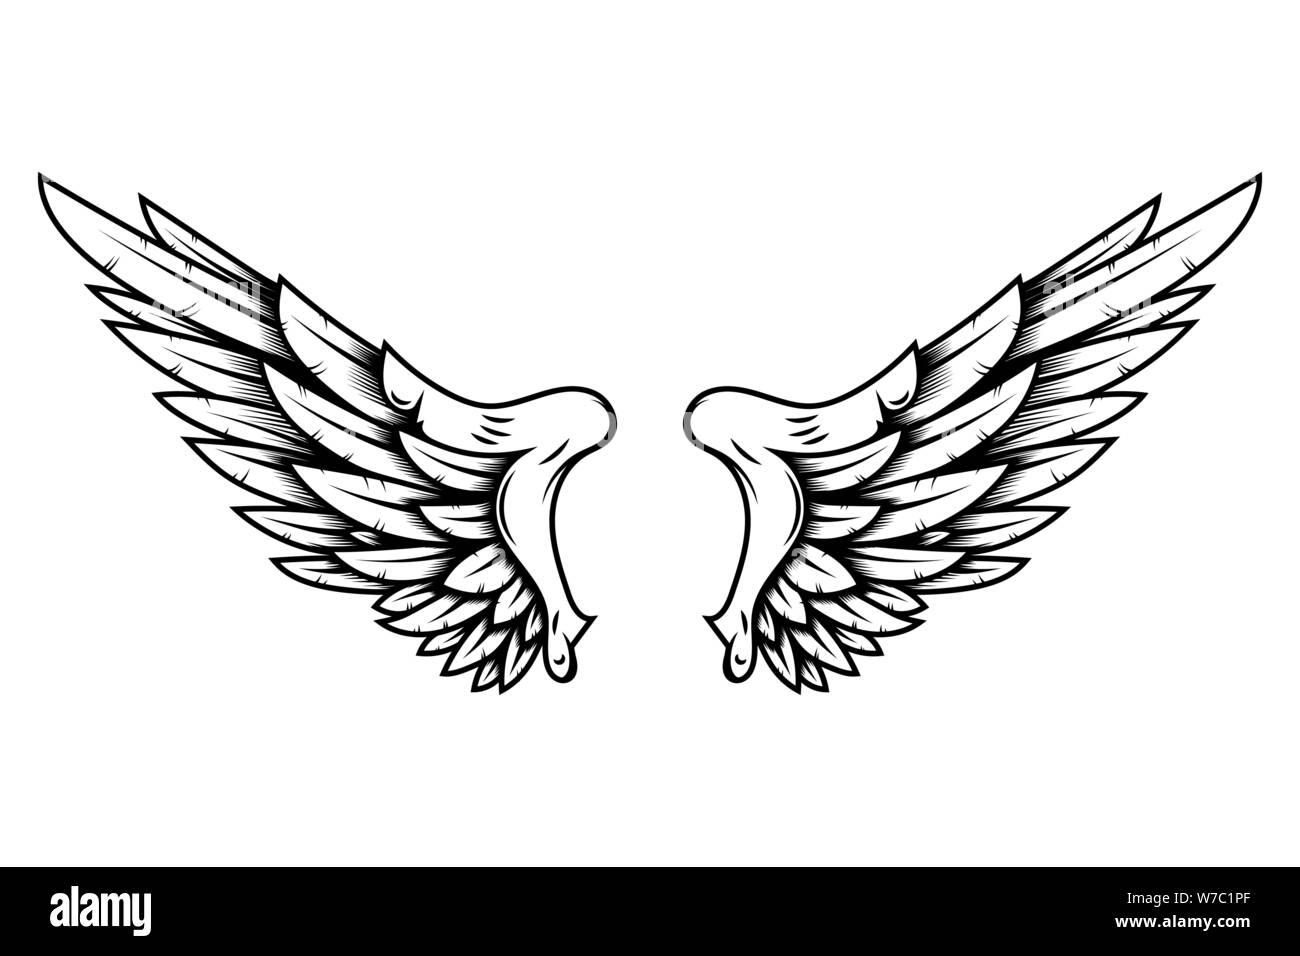 Hand Drawn Eagle Wings Illustration Isolated on White Background. Design  Element for Poster, Card, Banner, Sign, Emblem, T Shirt Stock Vector -  Illustration of decoration, holy: 127123142